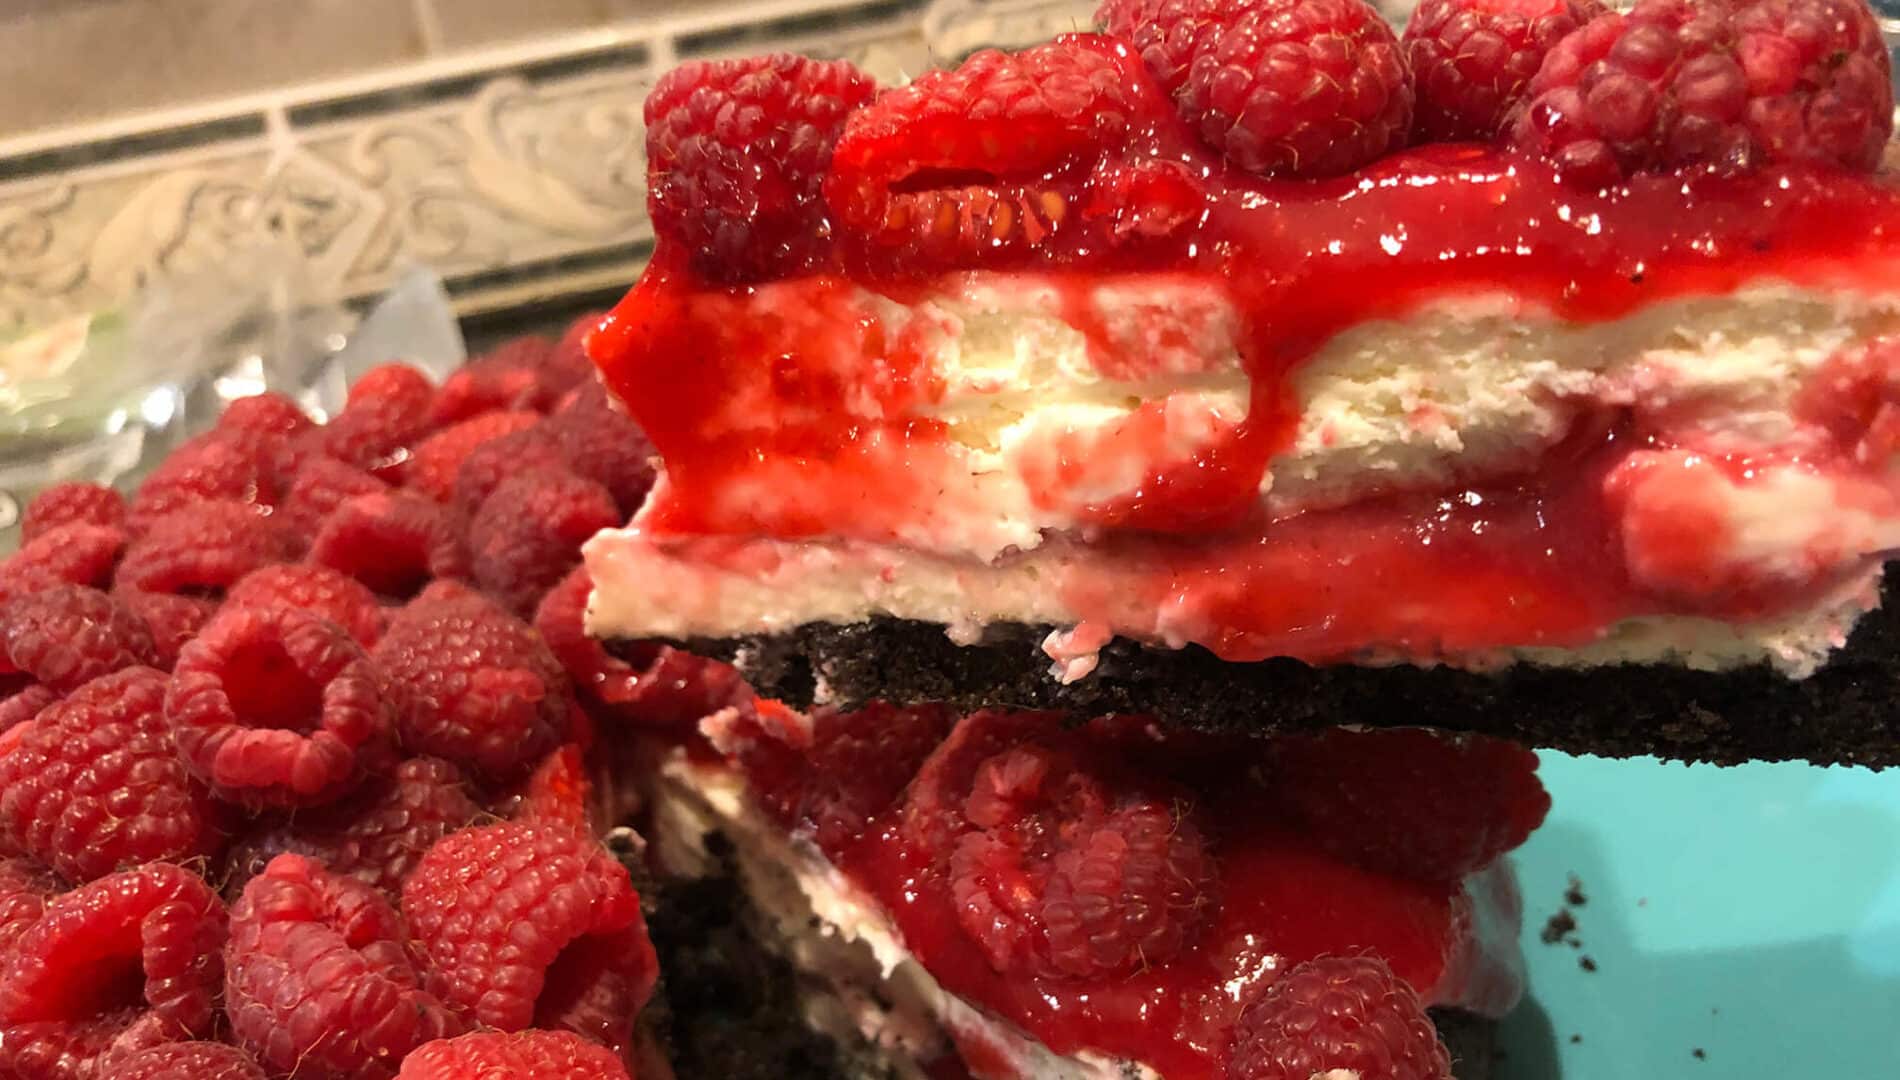 Creamy White Cheesecake with a red raspberry sauce topped with fresh strawberries, under a dark brown chocolate crust